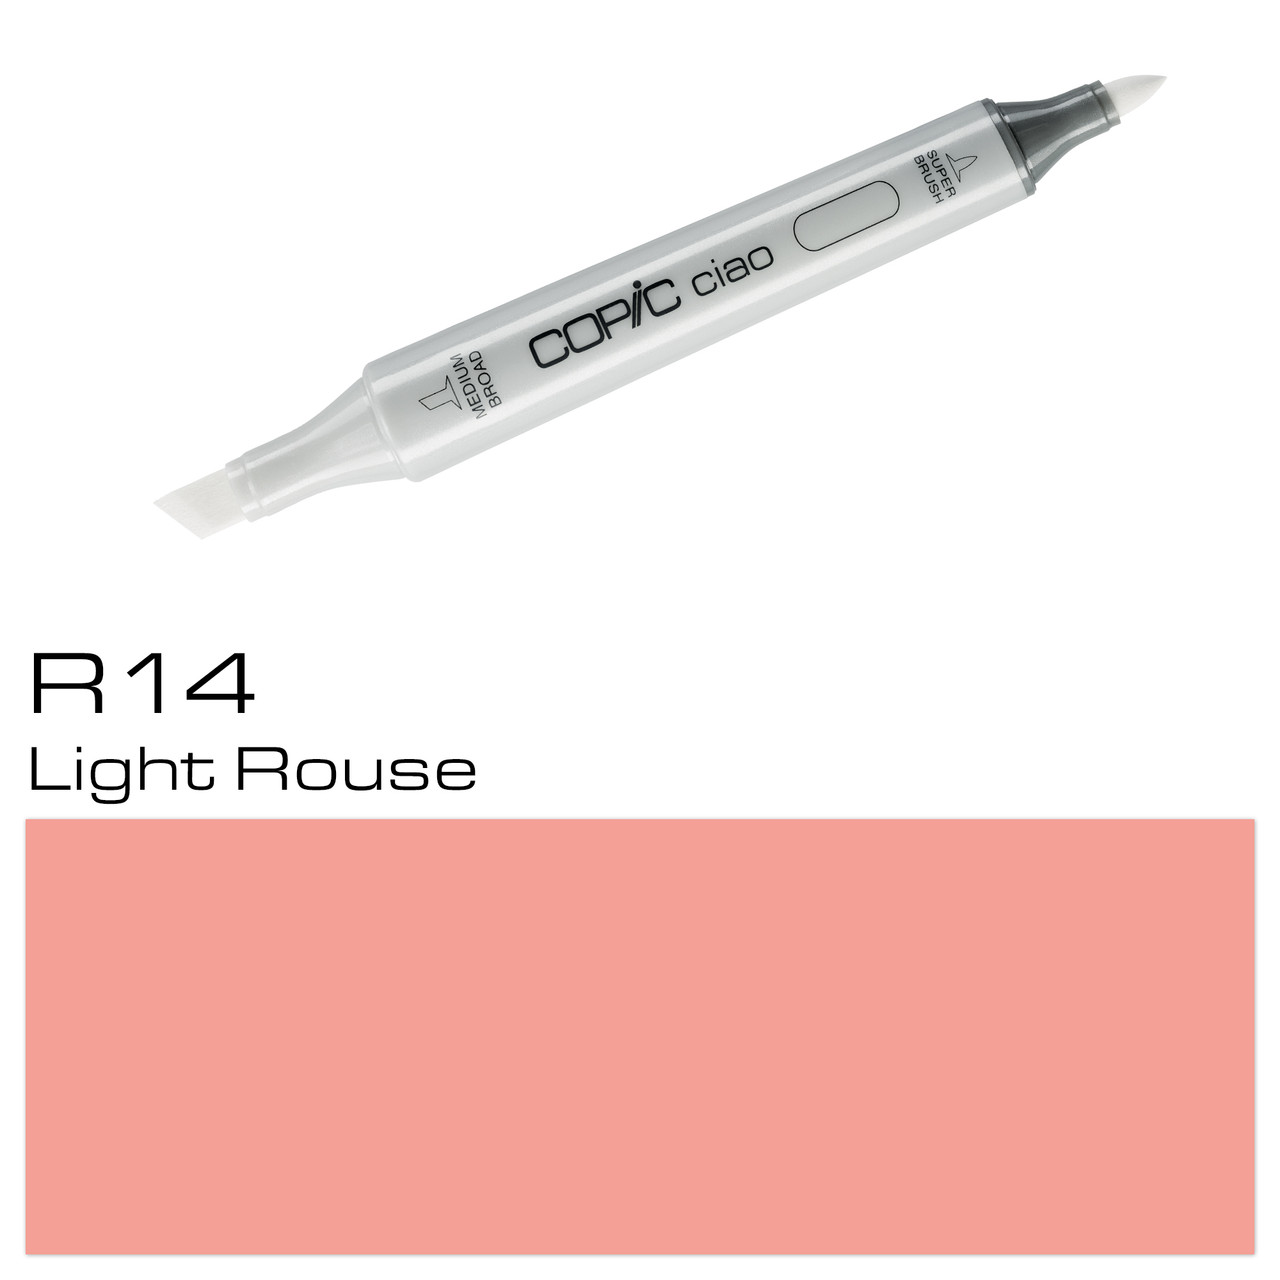 R14 Light Rouse 999994772942 Copic Copic Ciao Twin Tip Marker Pen 